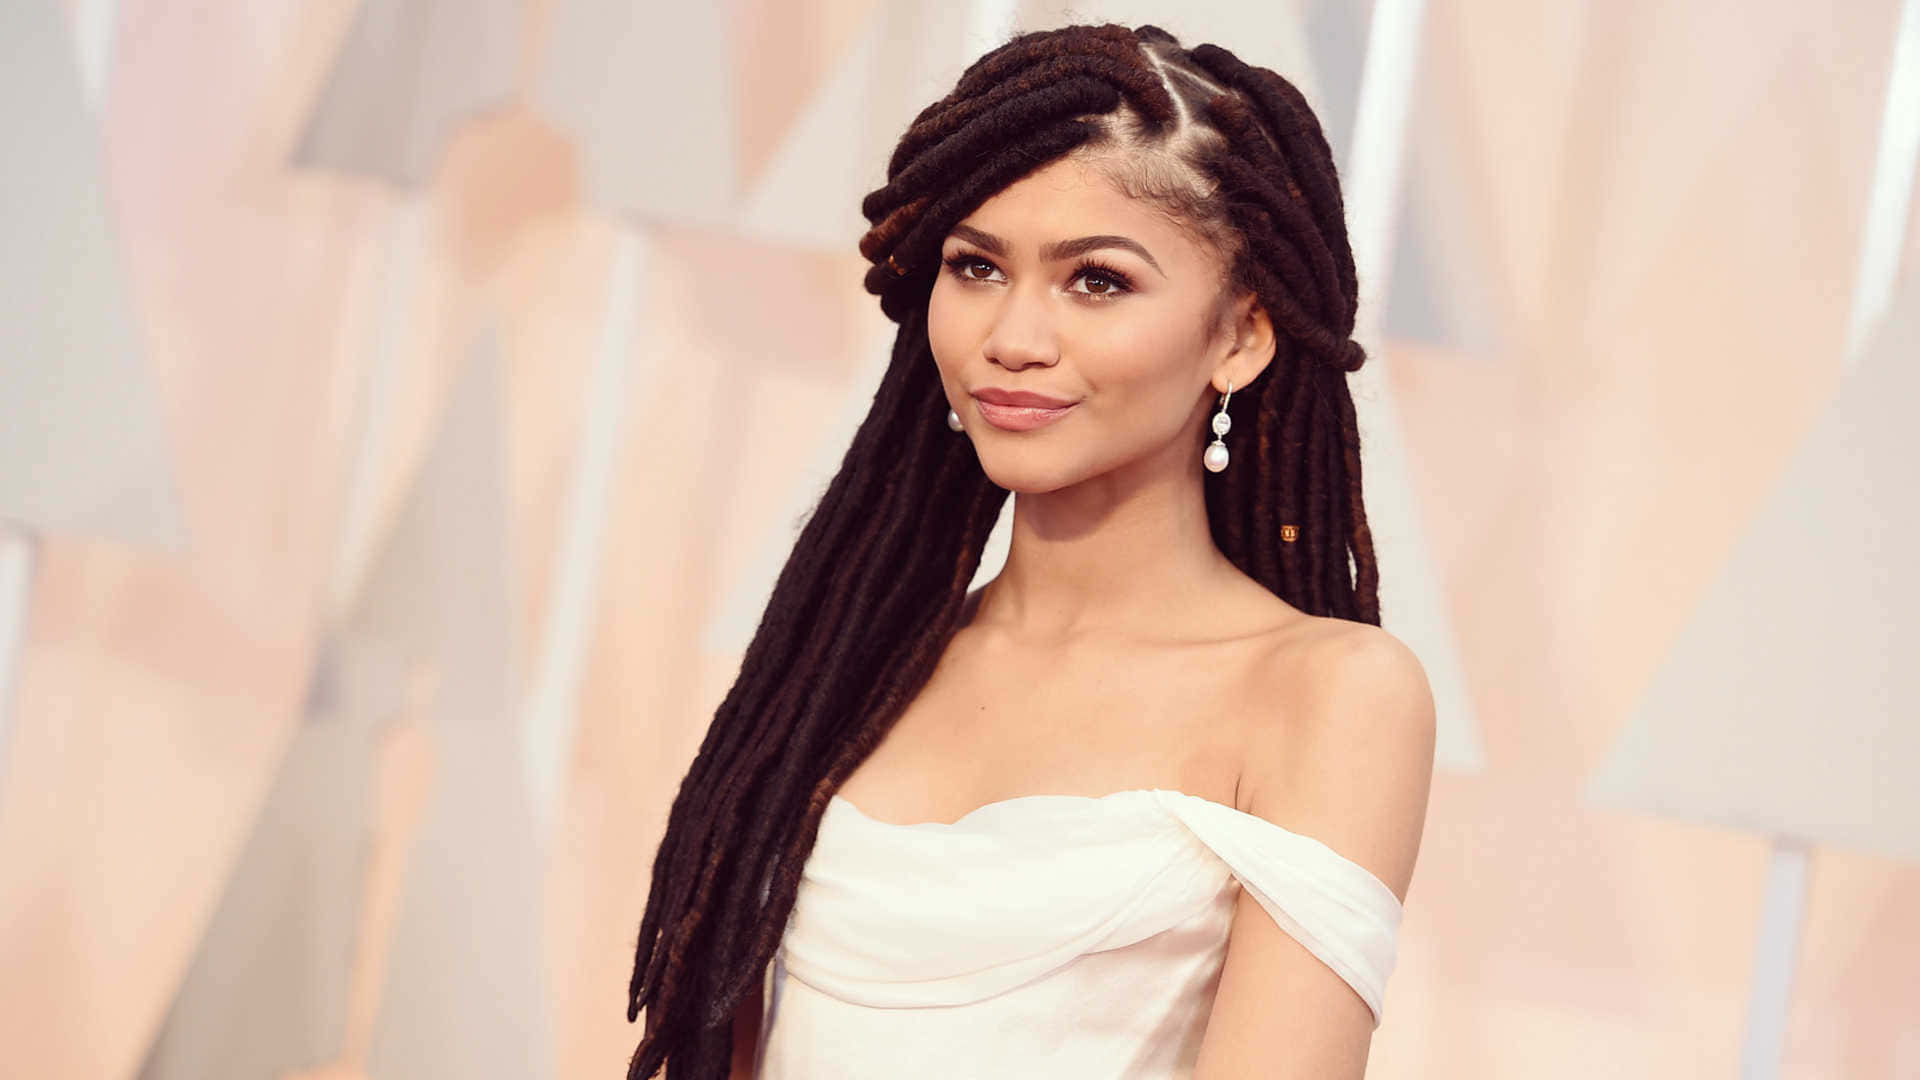 Zendayabox Braid Hd Represents A High-definition Computer Or Mobile Wallpaper Featuring Zendaya's Hairstyle Called 